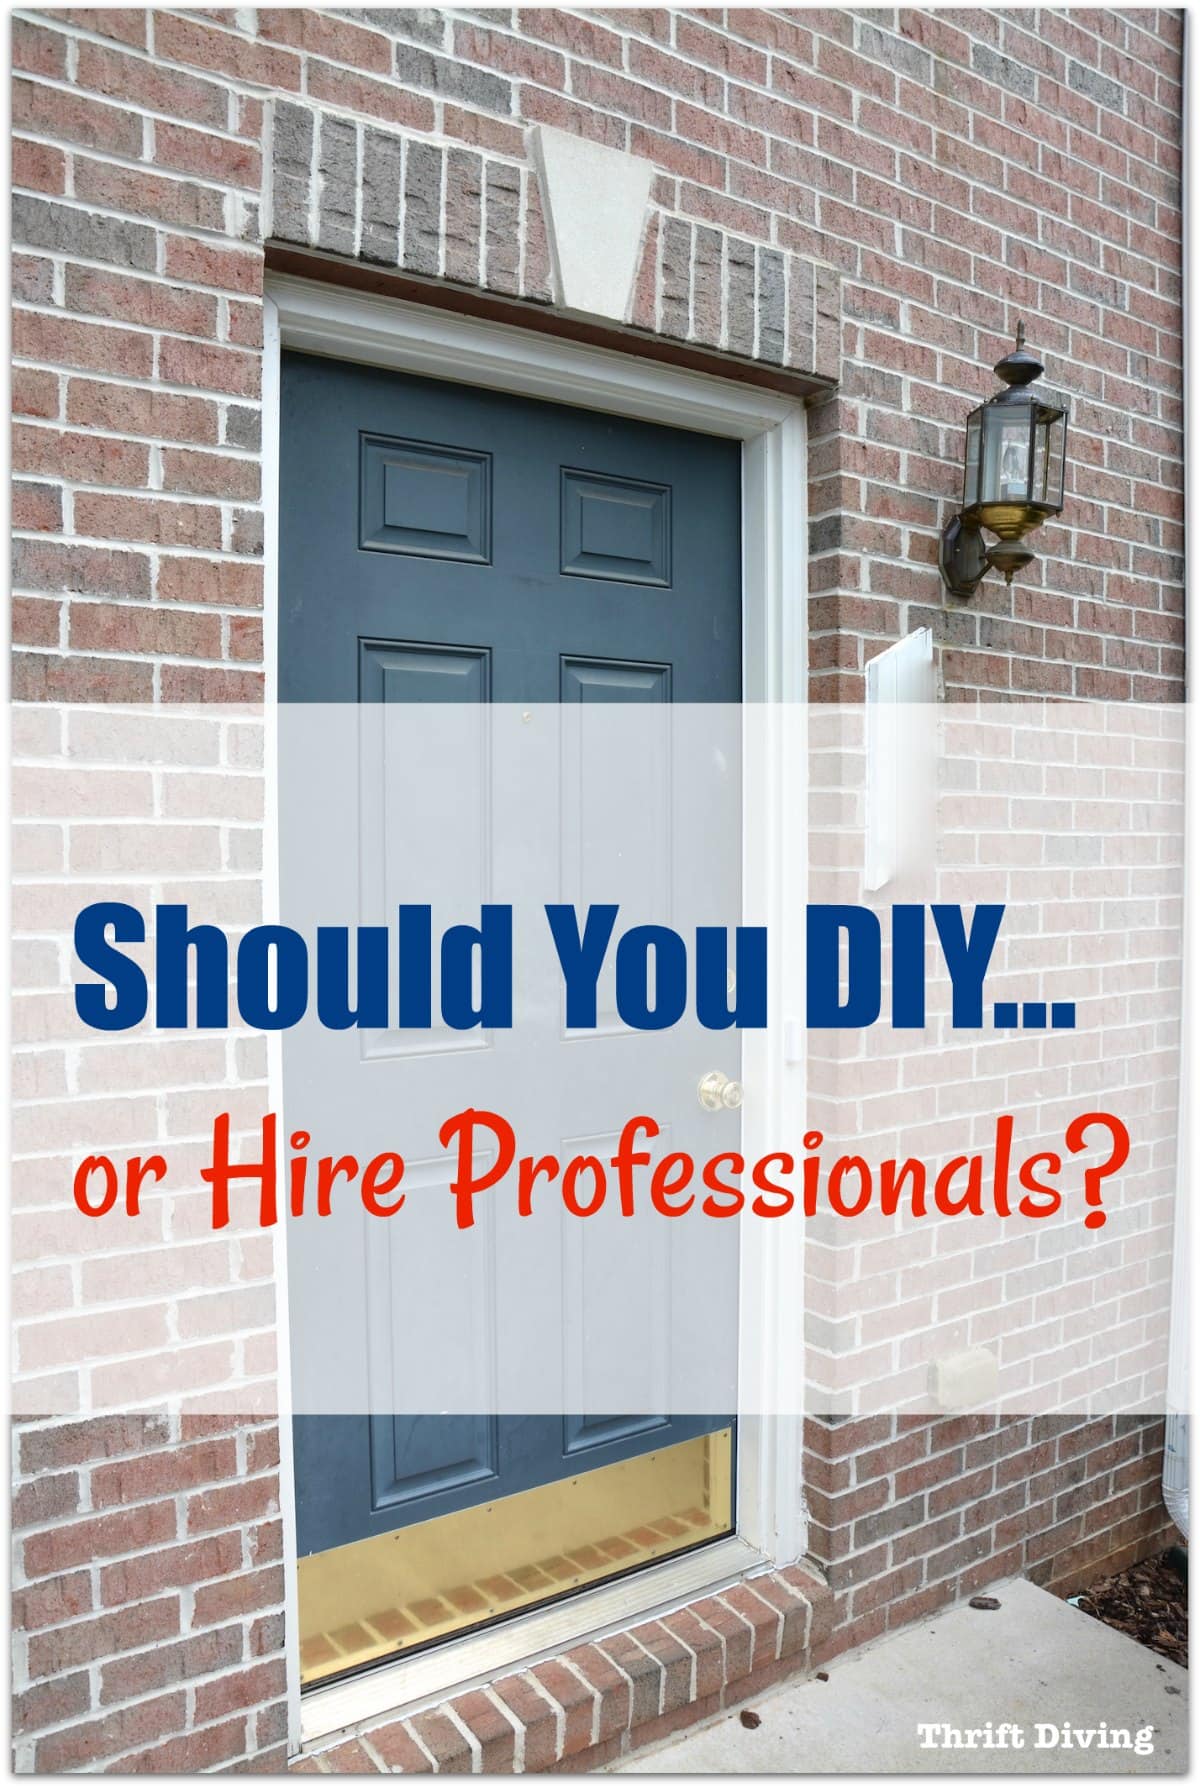 Hiring a Contractor: Should You DIY It or Hire a Professional Instead?